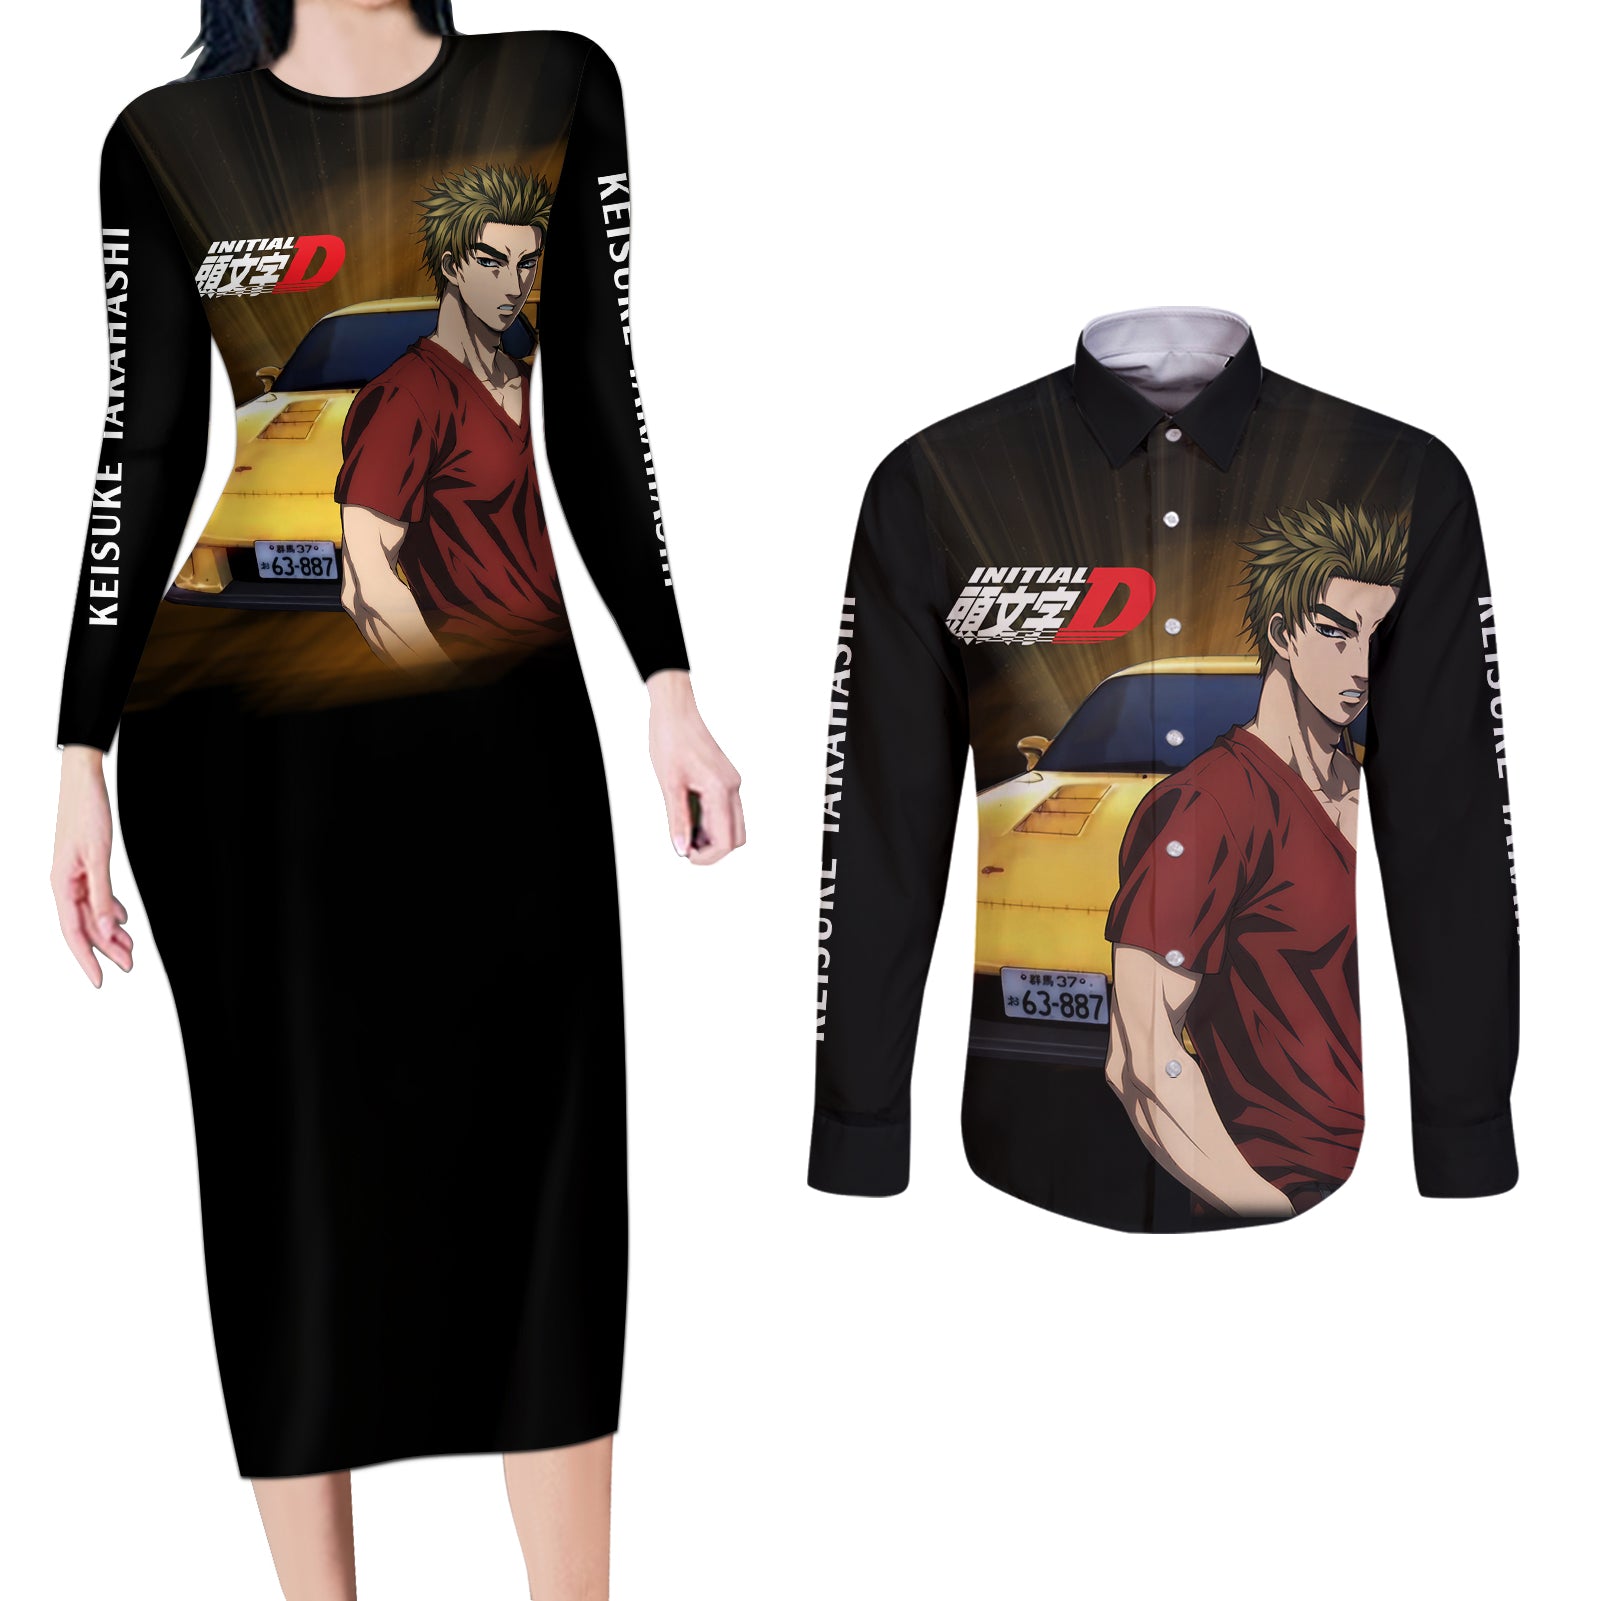 Keisuke Takahashi Initial D Couples Matching Long Sleeve Bodycon Dress and Long Sleeve Button Shirt Anime Style